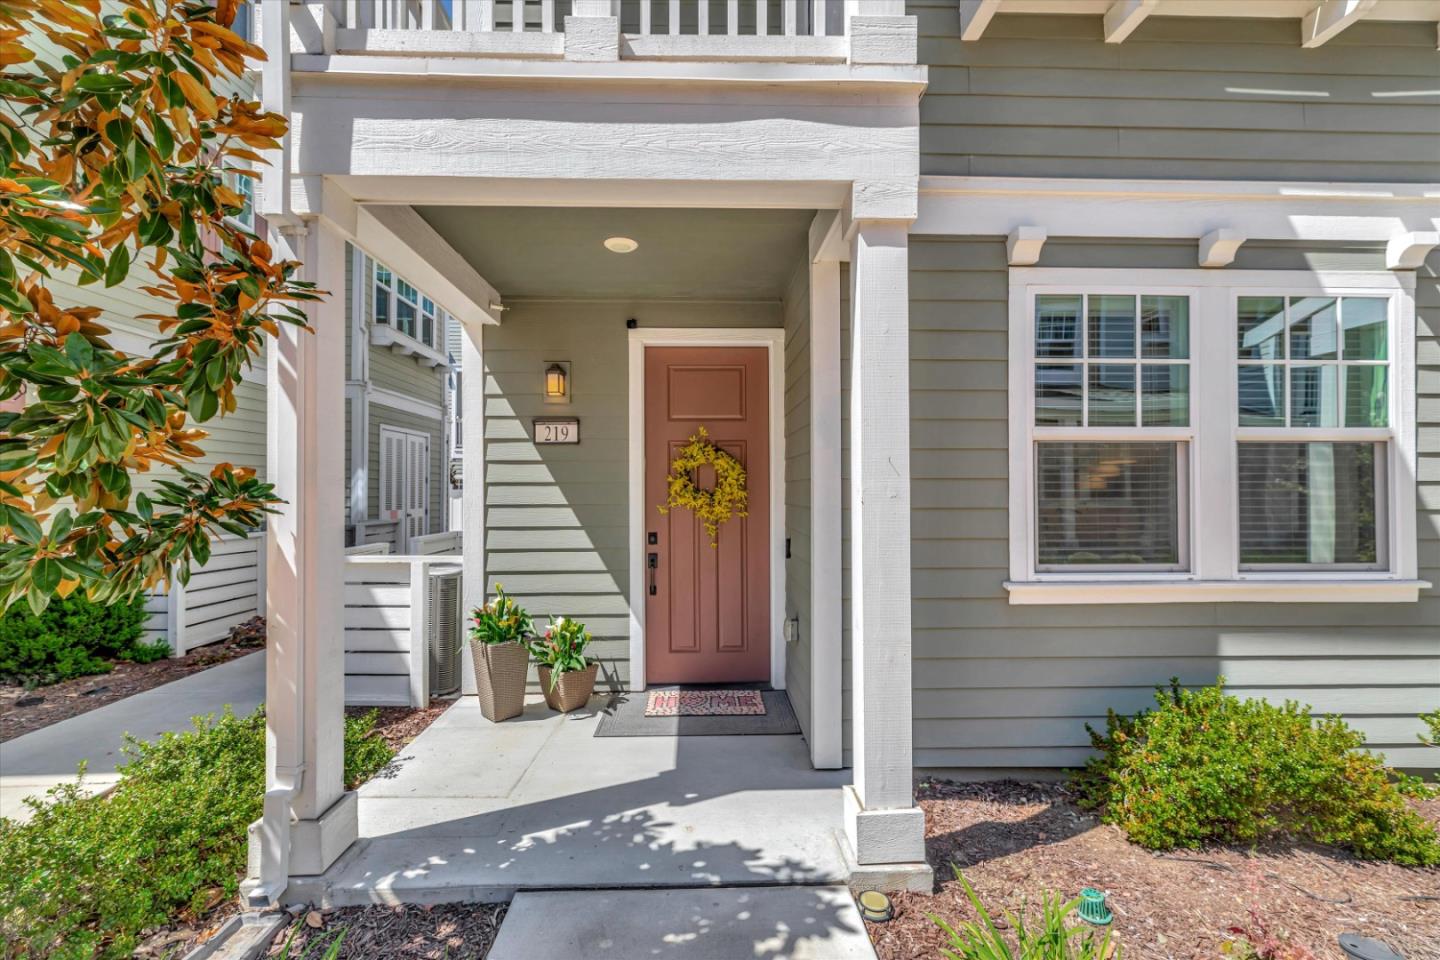 Photo of 219 Orbit Wy in Mountain View, CA